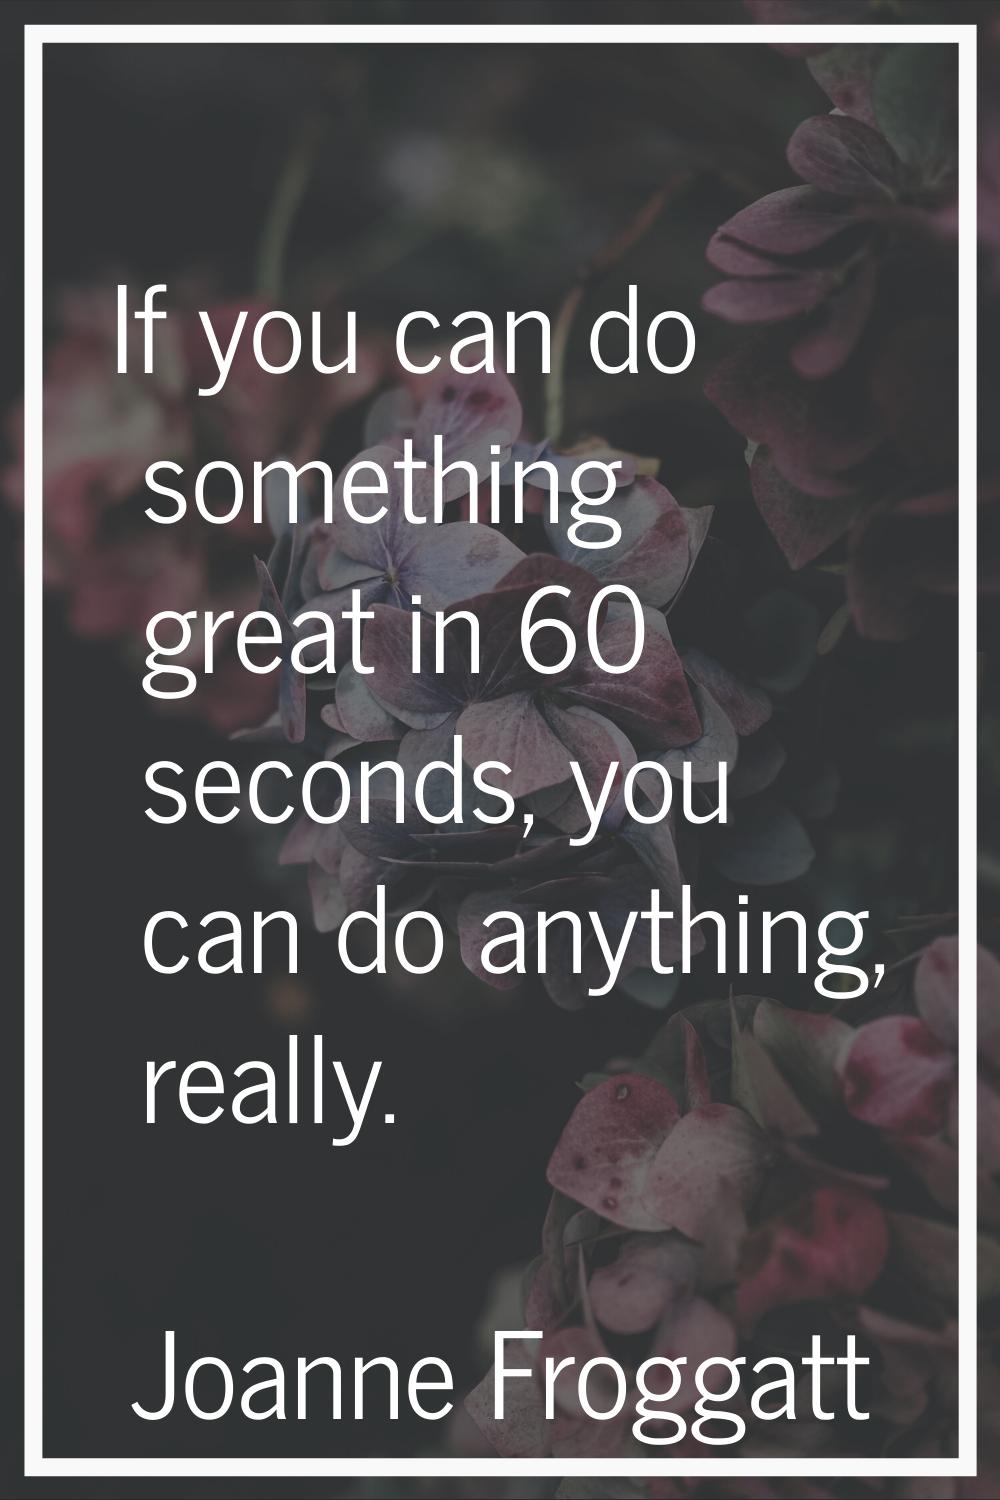 If you can do something great in 60 seconds, you can do anything, really.